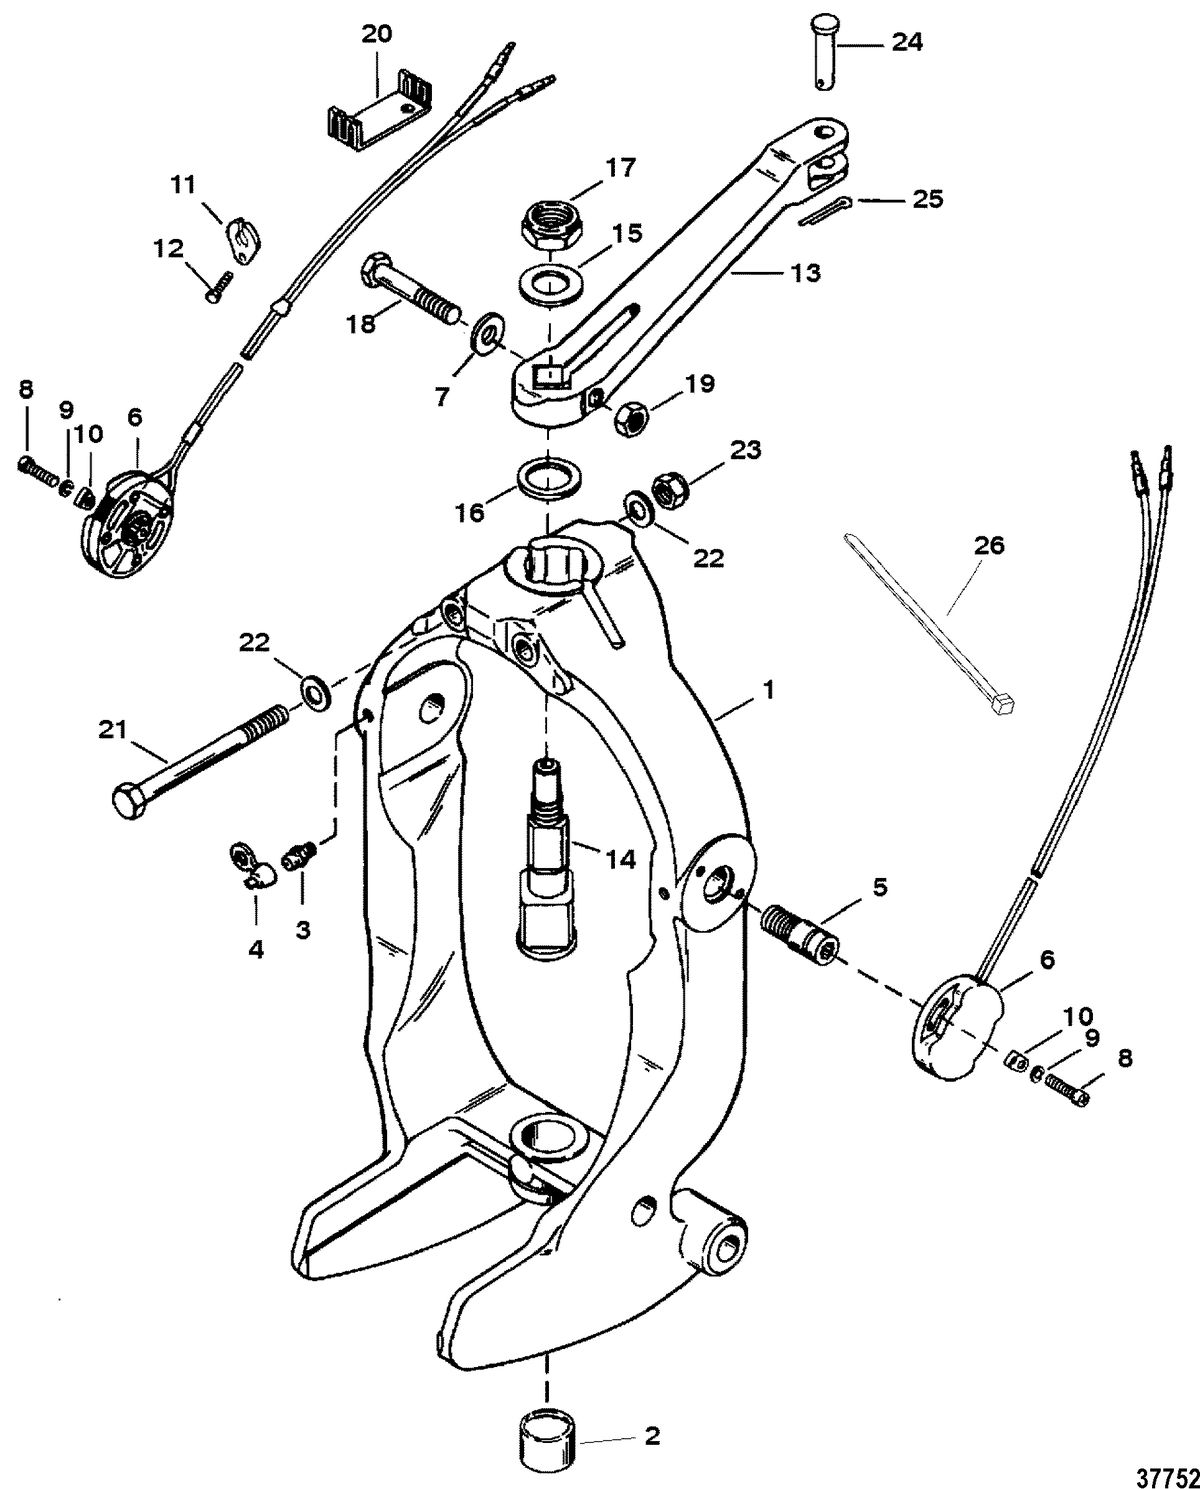 MERCRUISER ALPHA ONE (GEN. II) STERNDRIVE AND TRANSOM ASSEMBLY GIMBAL RING AND STEERING LEVER